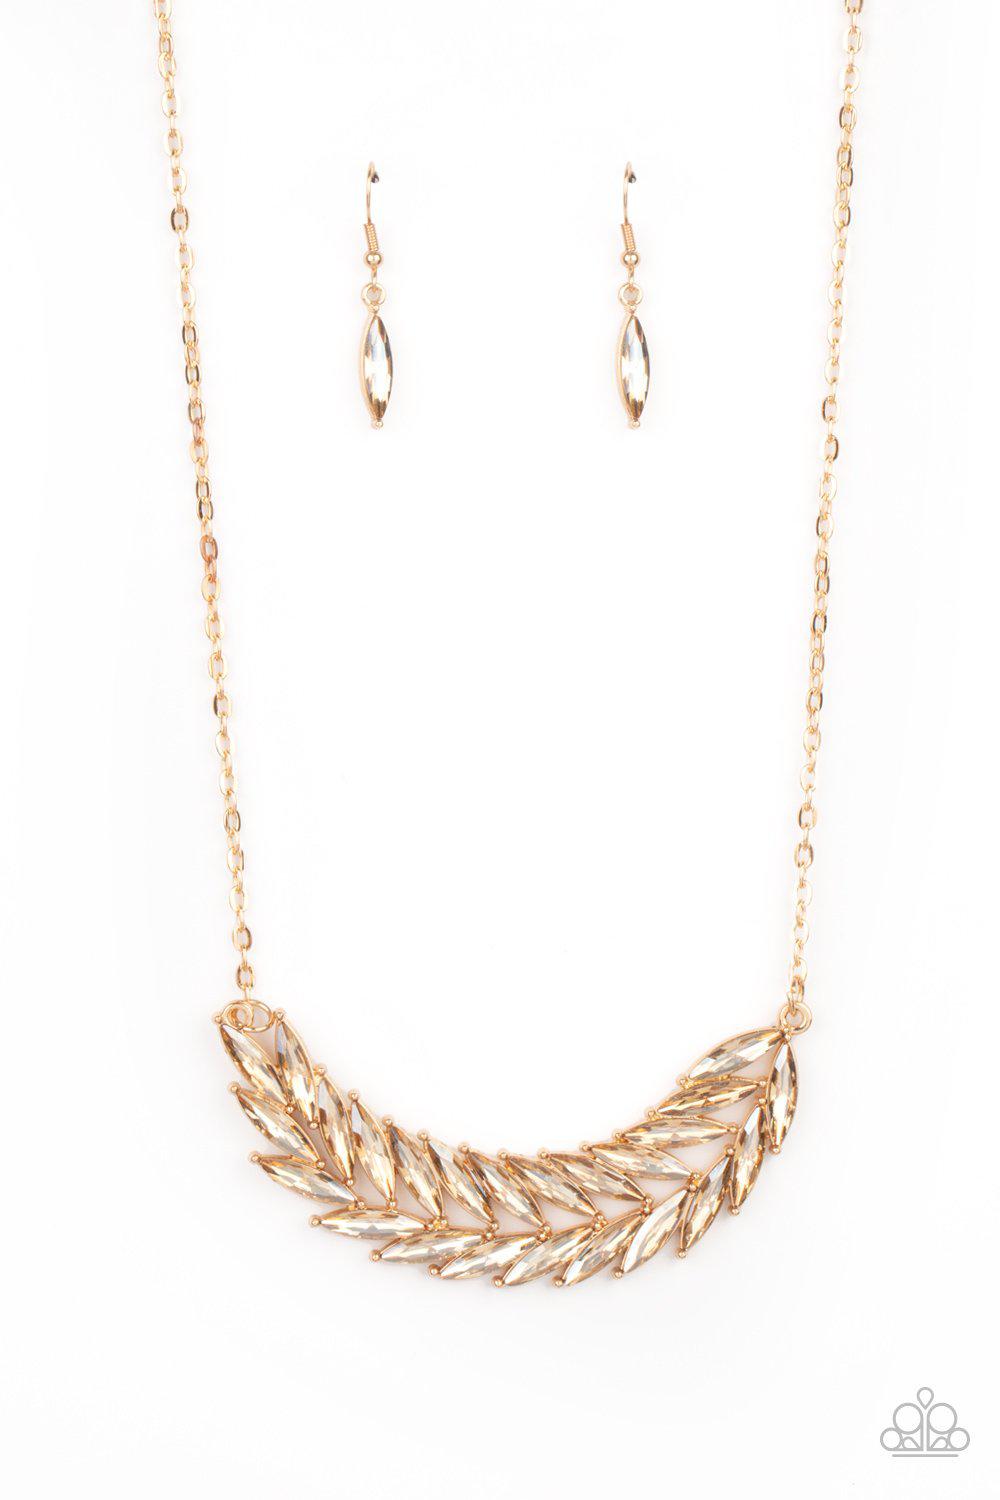 Flight of FANCINESS Gold Rhinestone Feather Necklace - Paparazzi Accessories- lightbox - CarasShop.com - $5 Jewelry by Cara Jewels